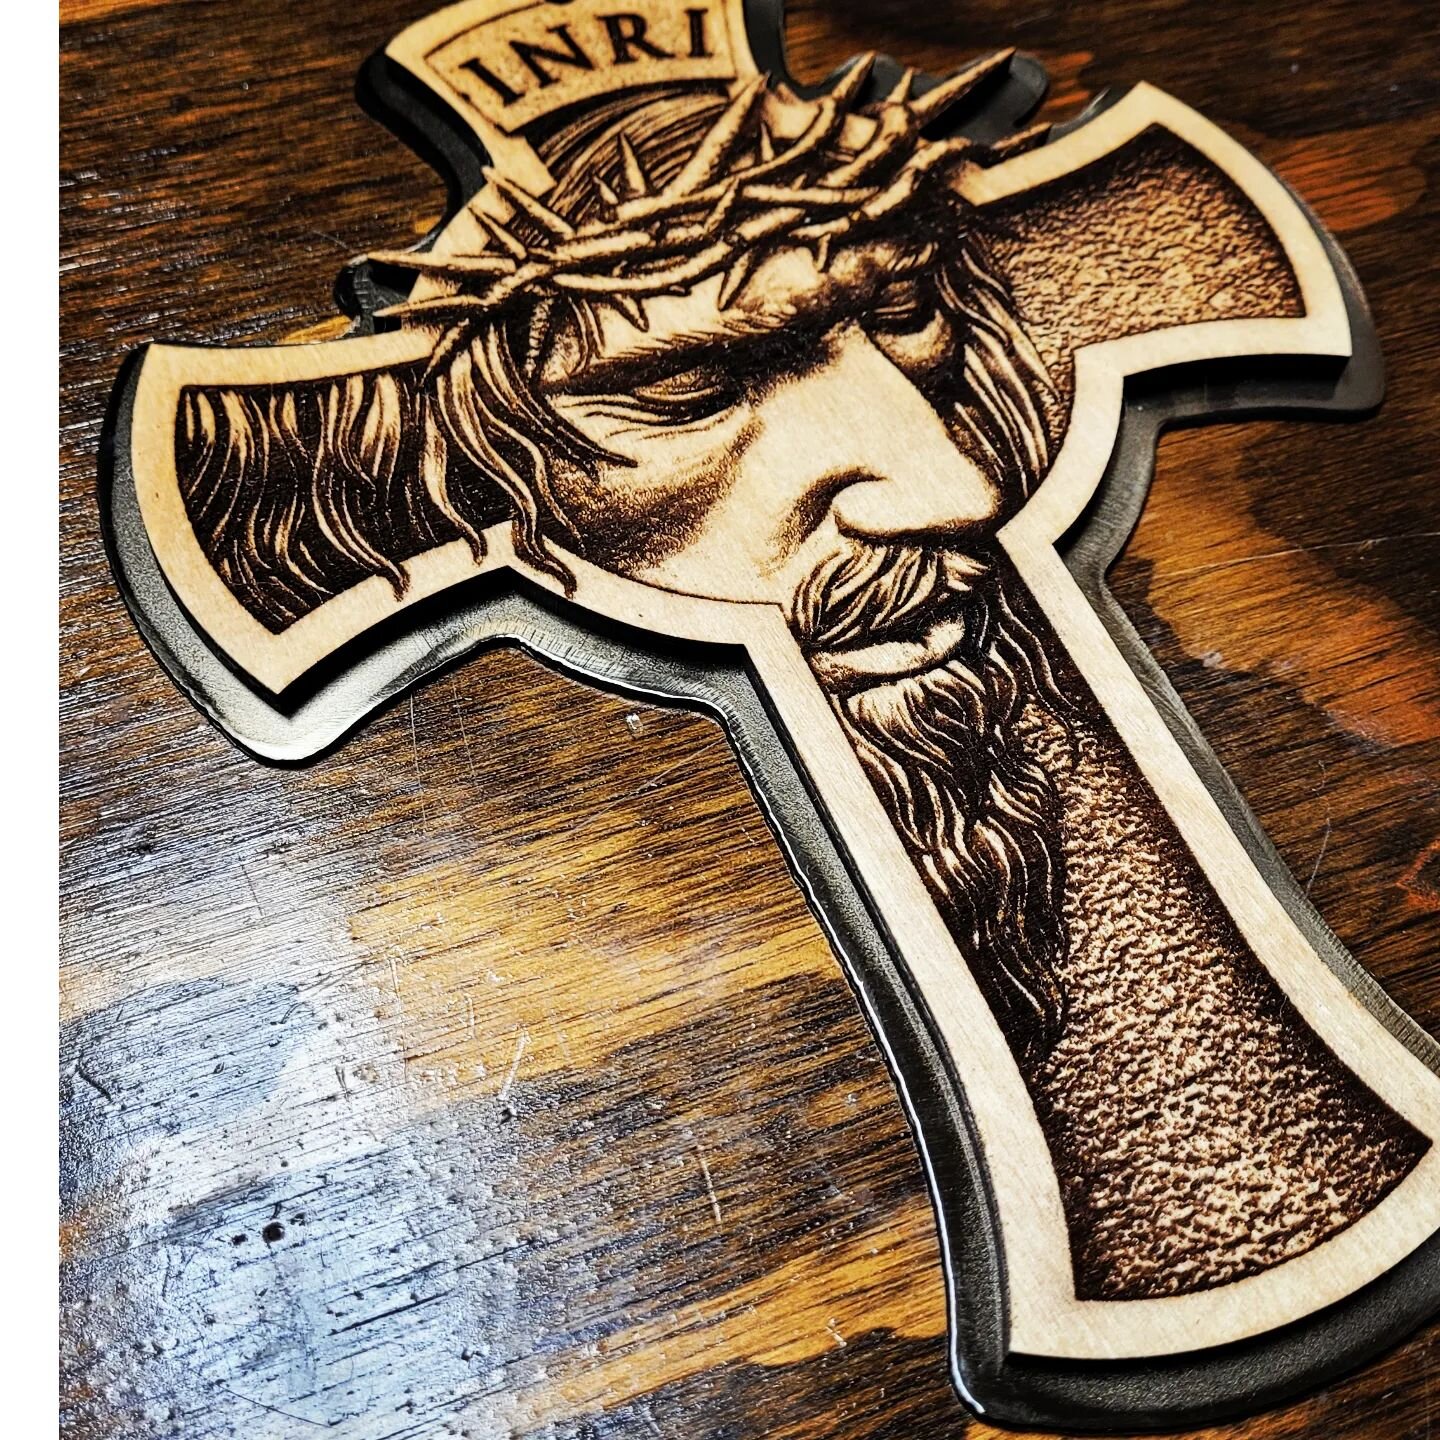 Some of our laser cut and engraved wooden and steel crosses @flashpointsteel 

#laserengraving
#lasercutting #powdercoating #graphicdesign #metalwork #metalart #cross #jesus #religious #cnclaser